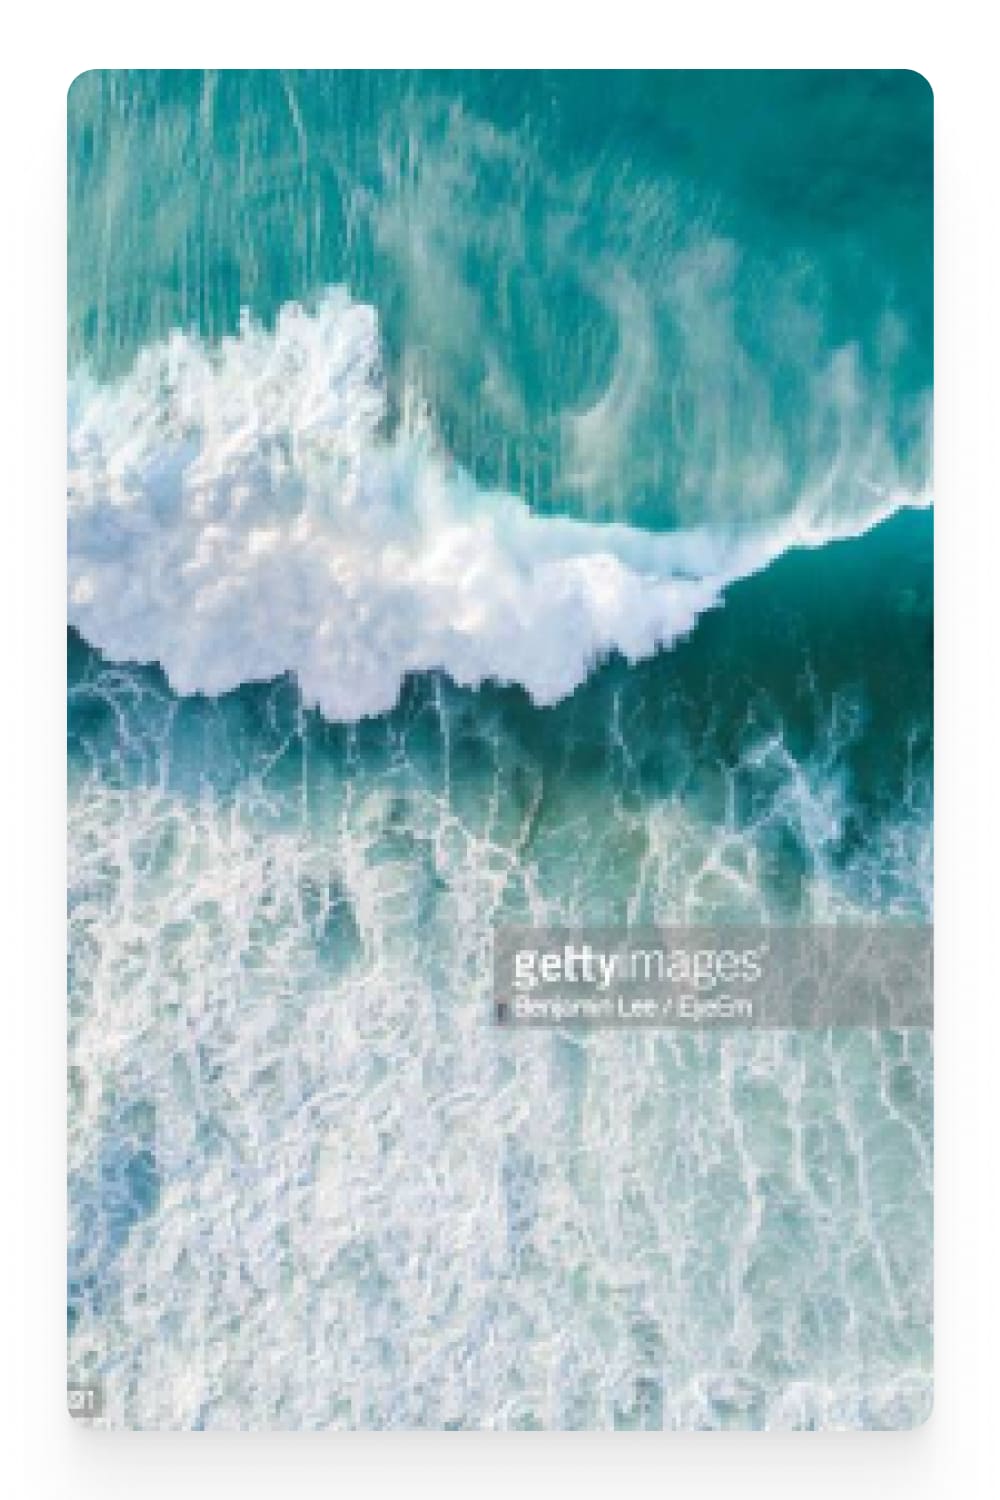 Photo of the surf from above.